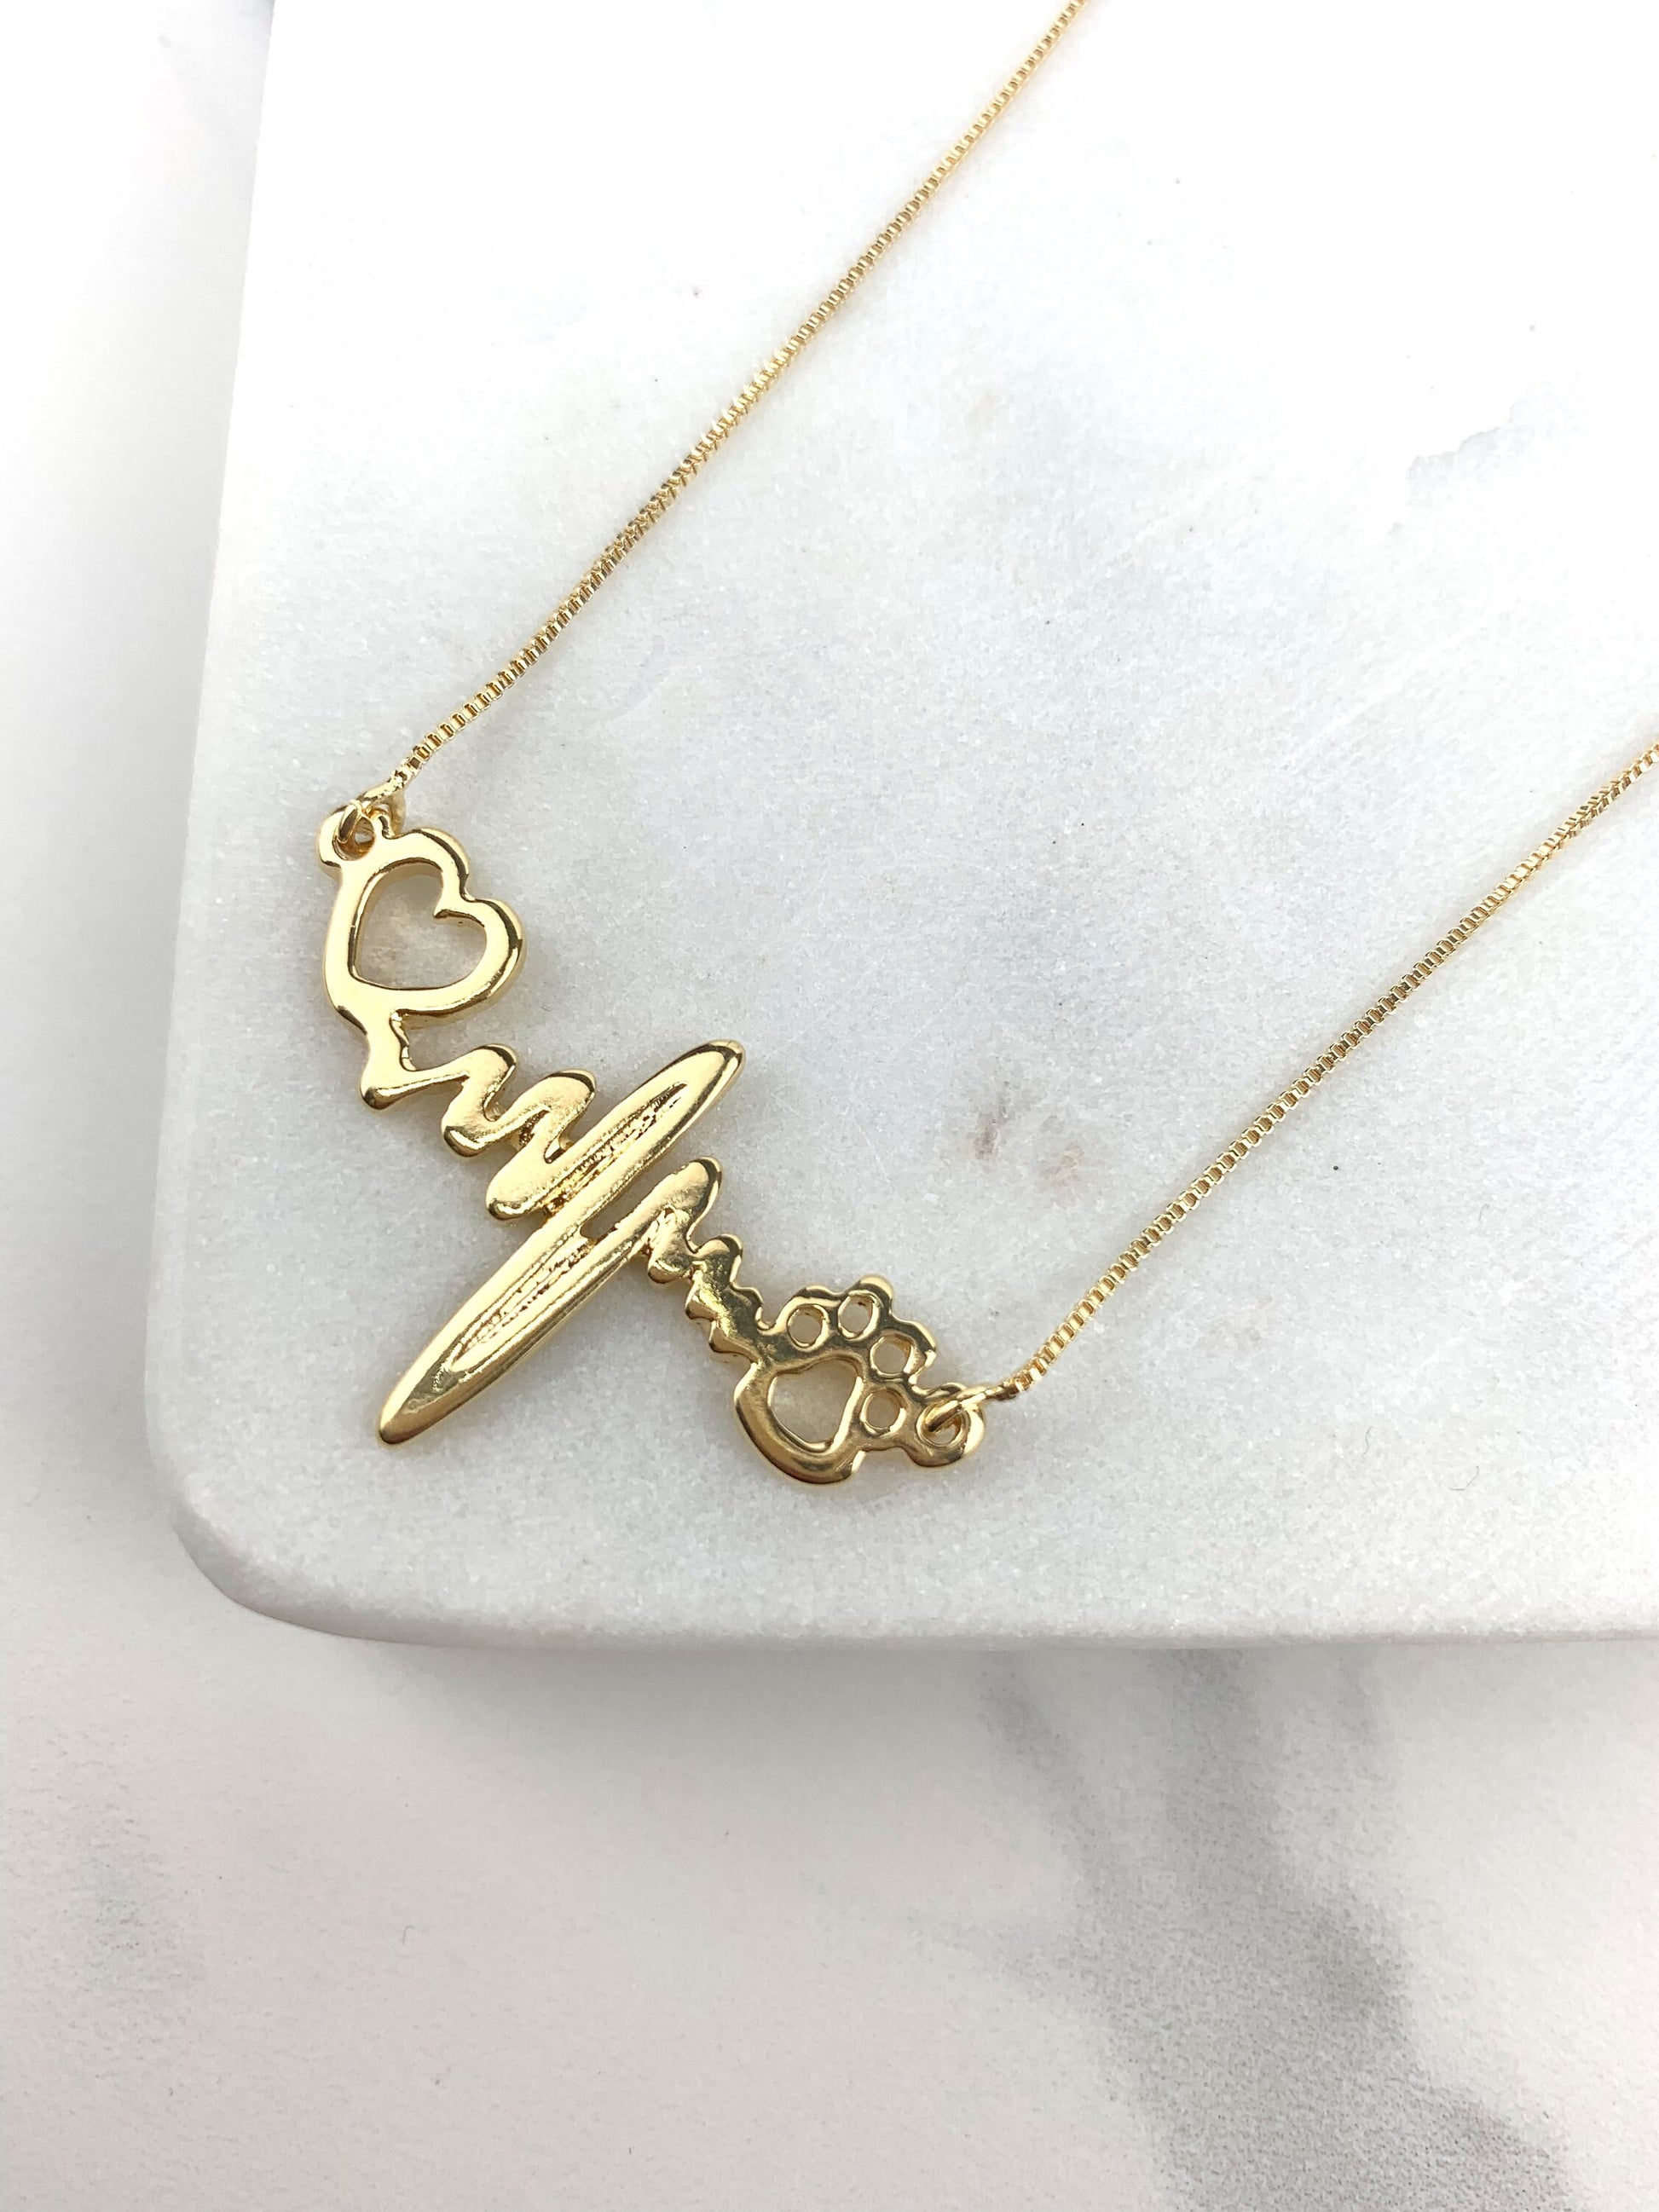 18k Gold Filled Box Link  Chain Fancy Heartbeat Dog Pet Lover Necklace Wholesale  Jewelry Supplies